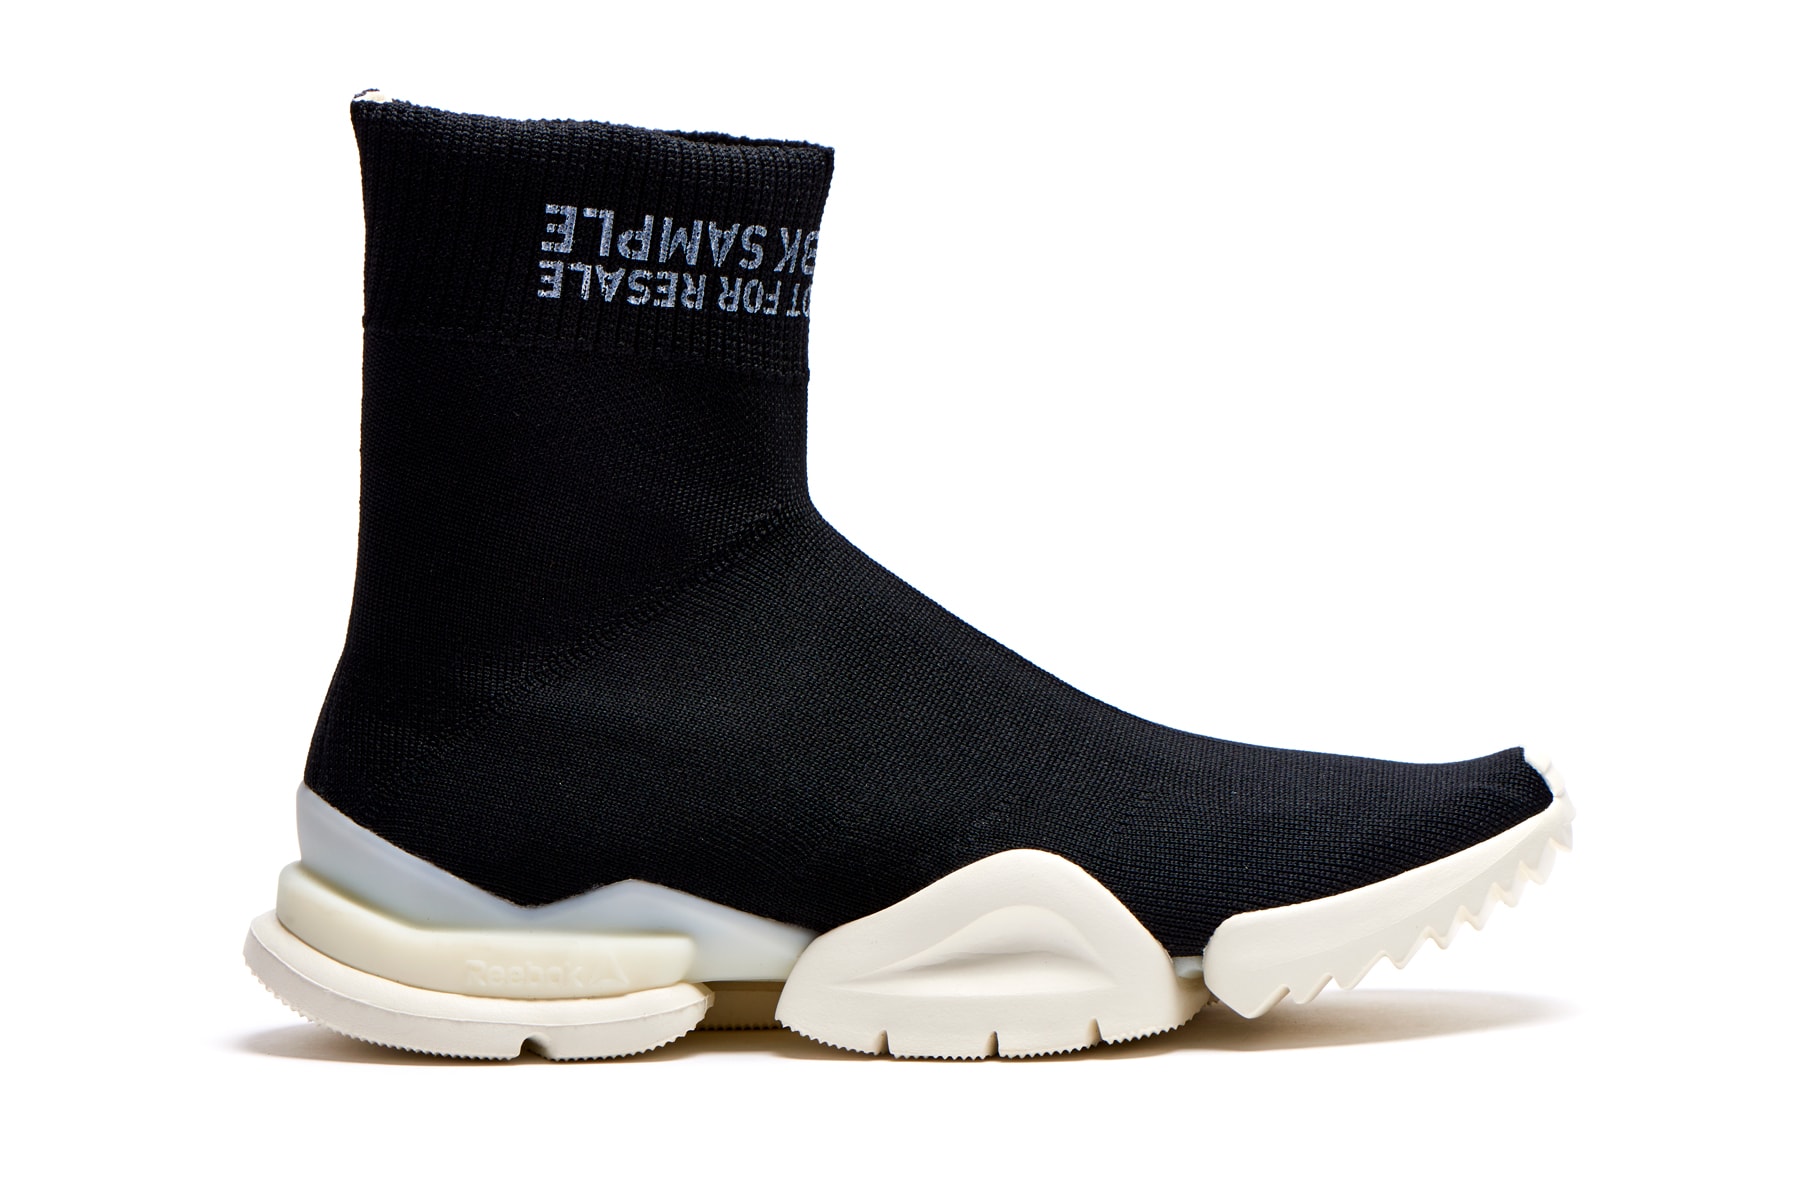 Reebok Sock Run.R Barneys exclusive drop vetements Not For Resale RBK Sample black sole technical knit may 11 18 2018 spring summer